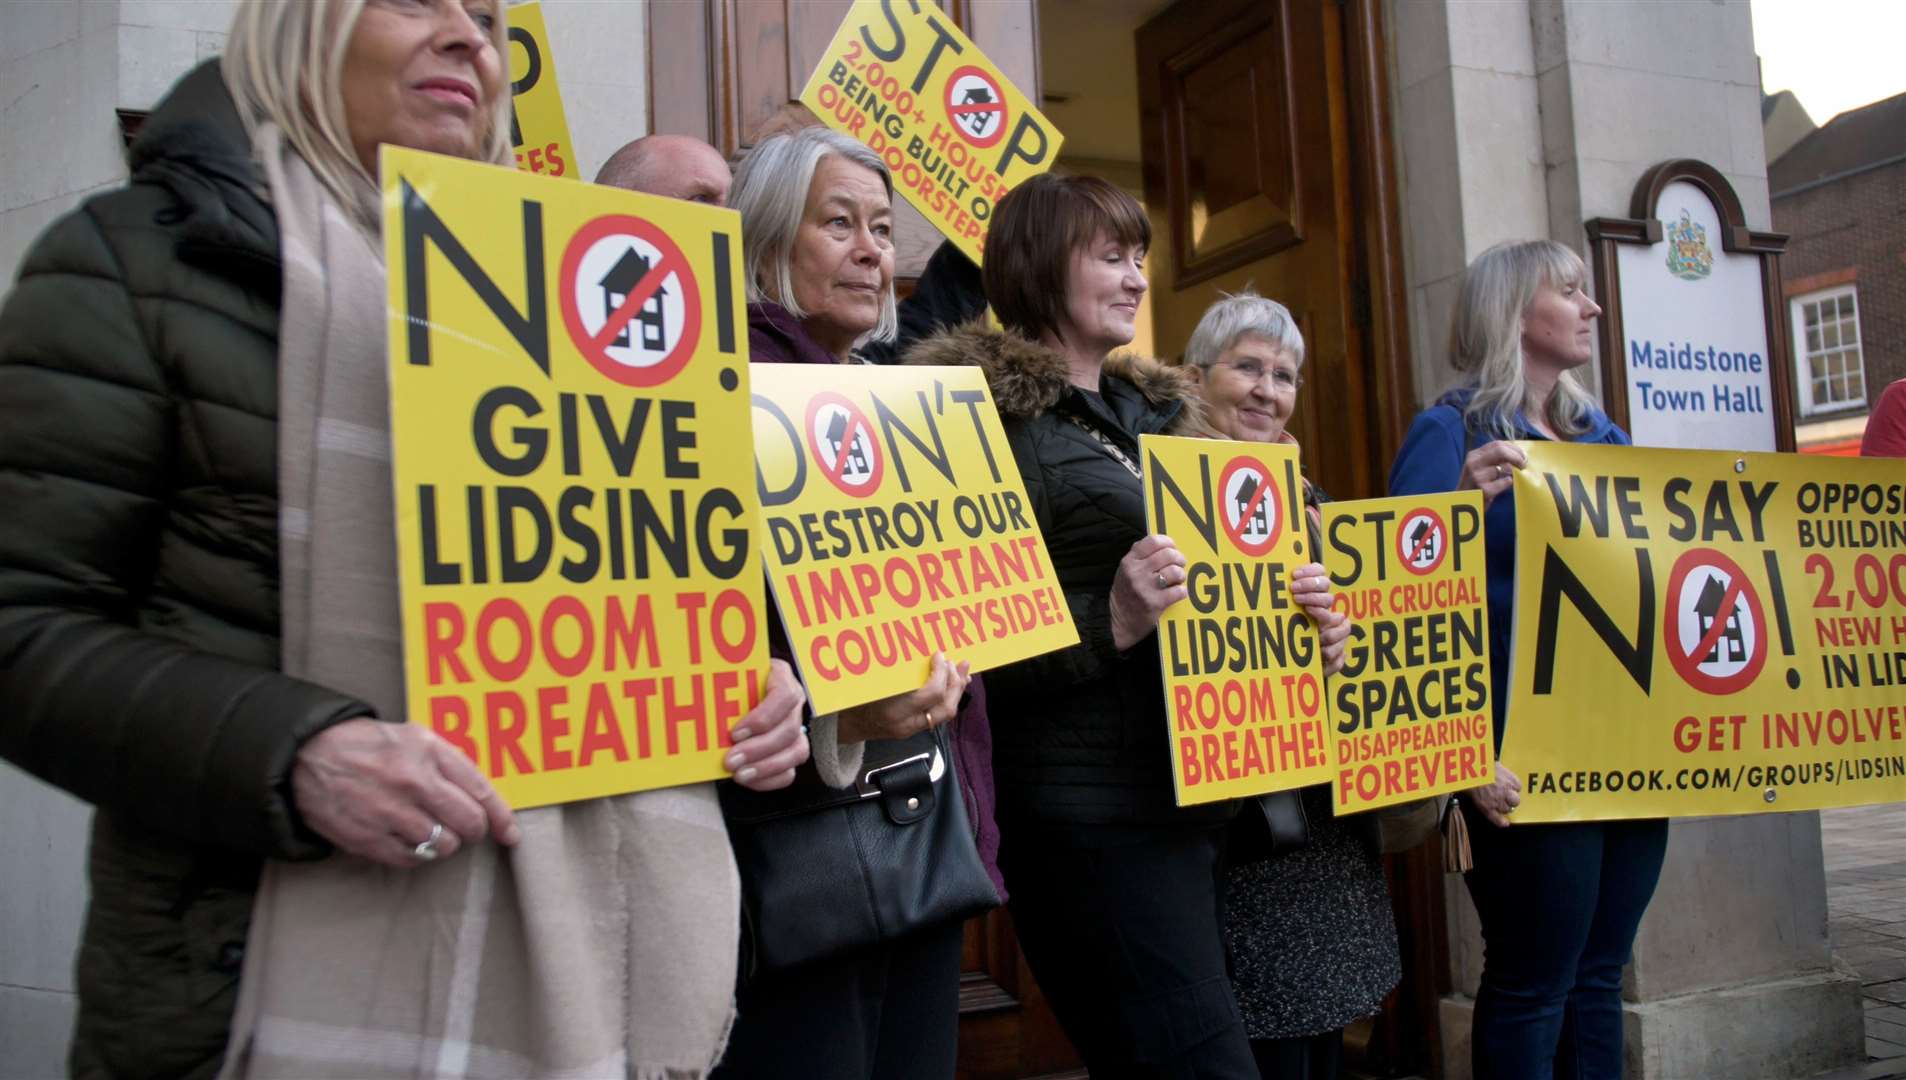 One of the many protests against the Lidsing Garden Village scheme